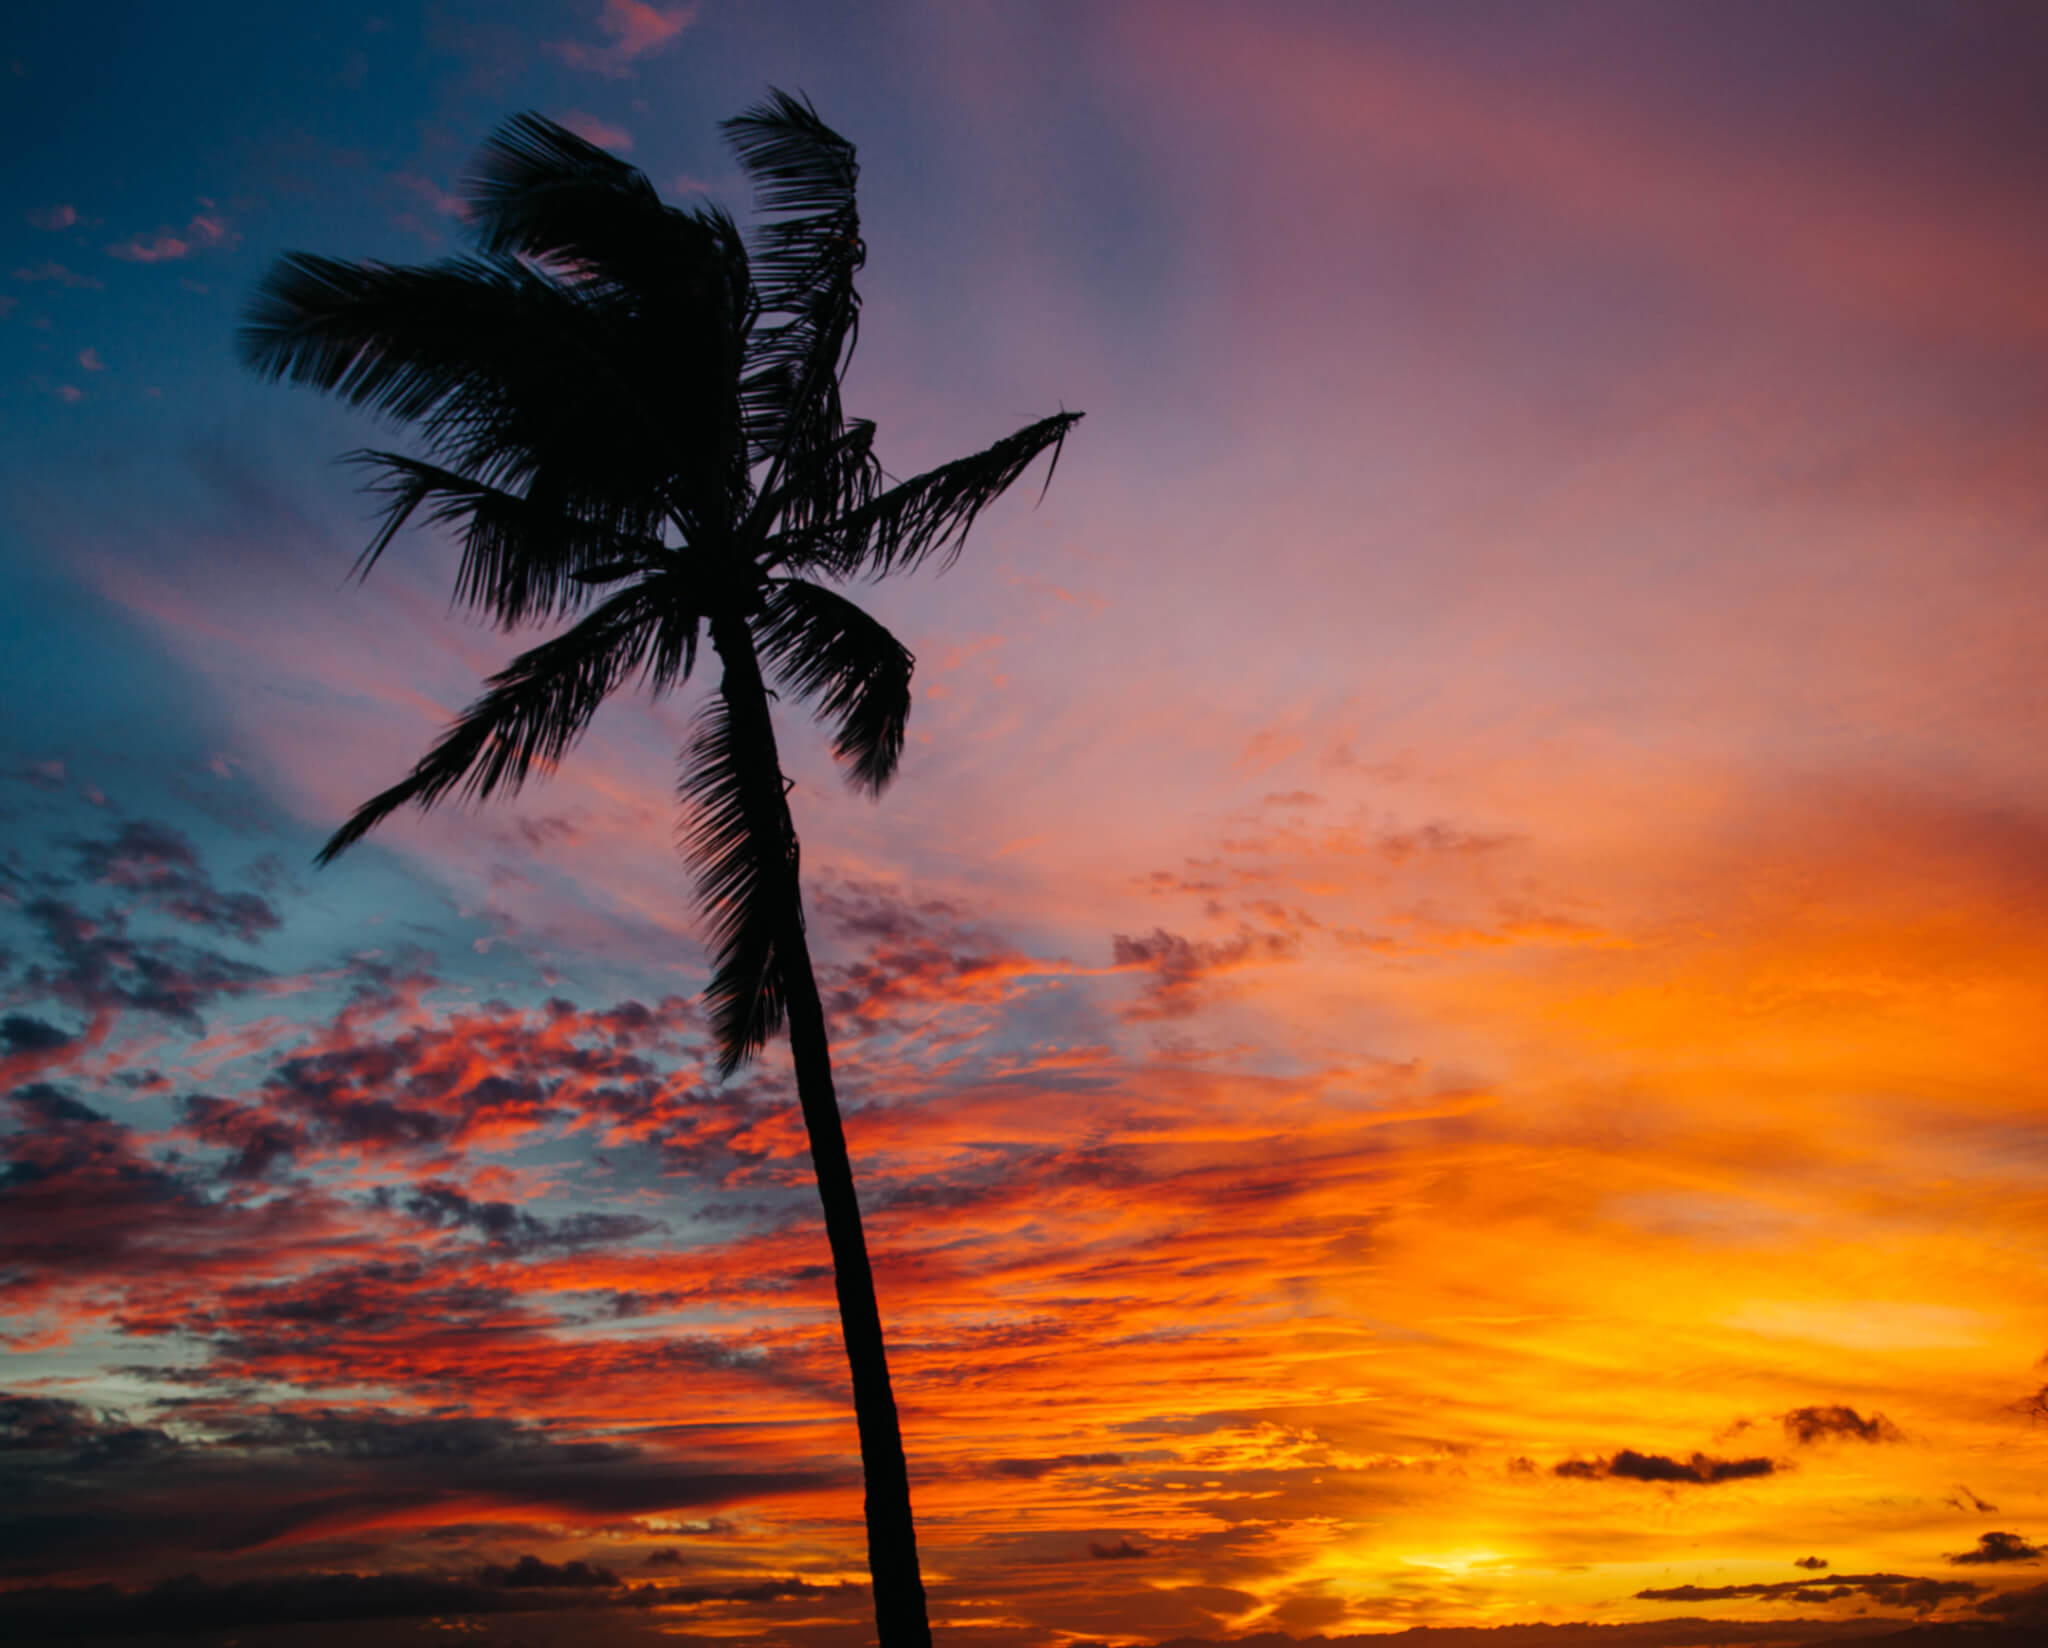 Palm tree silhouette during sunset